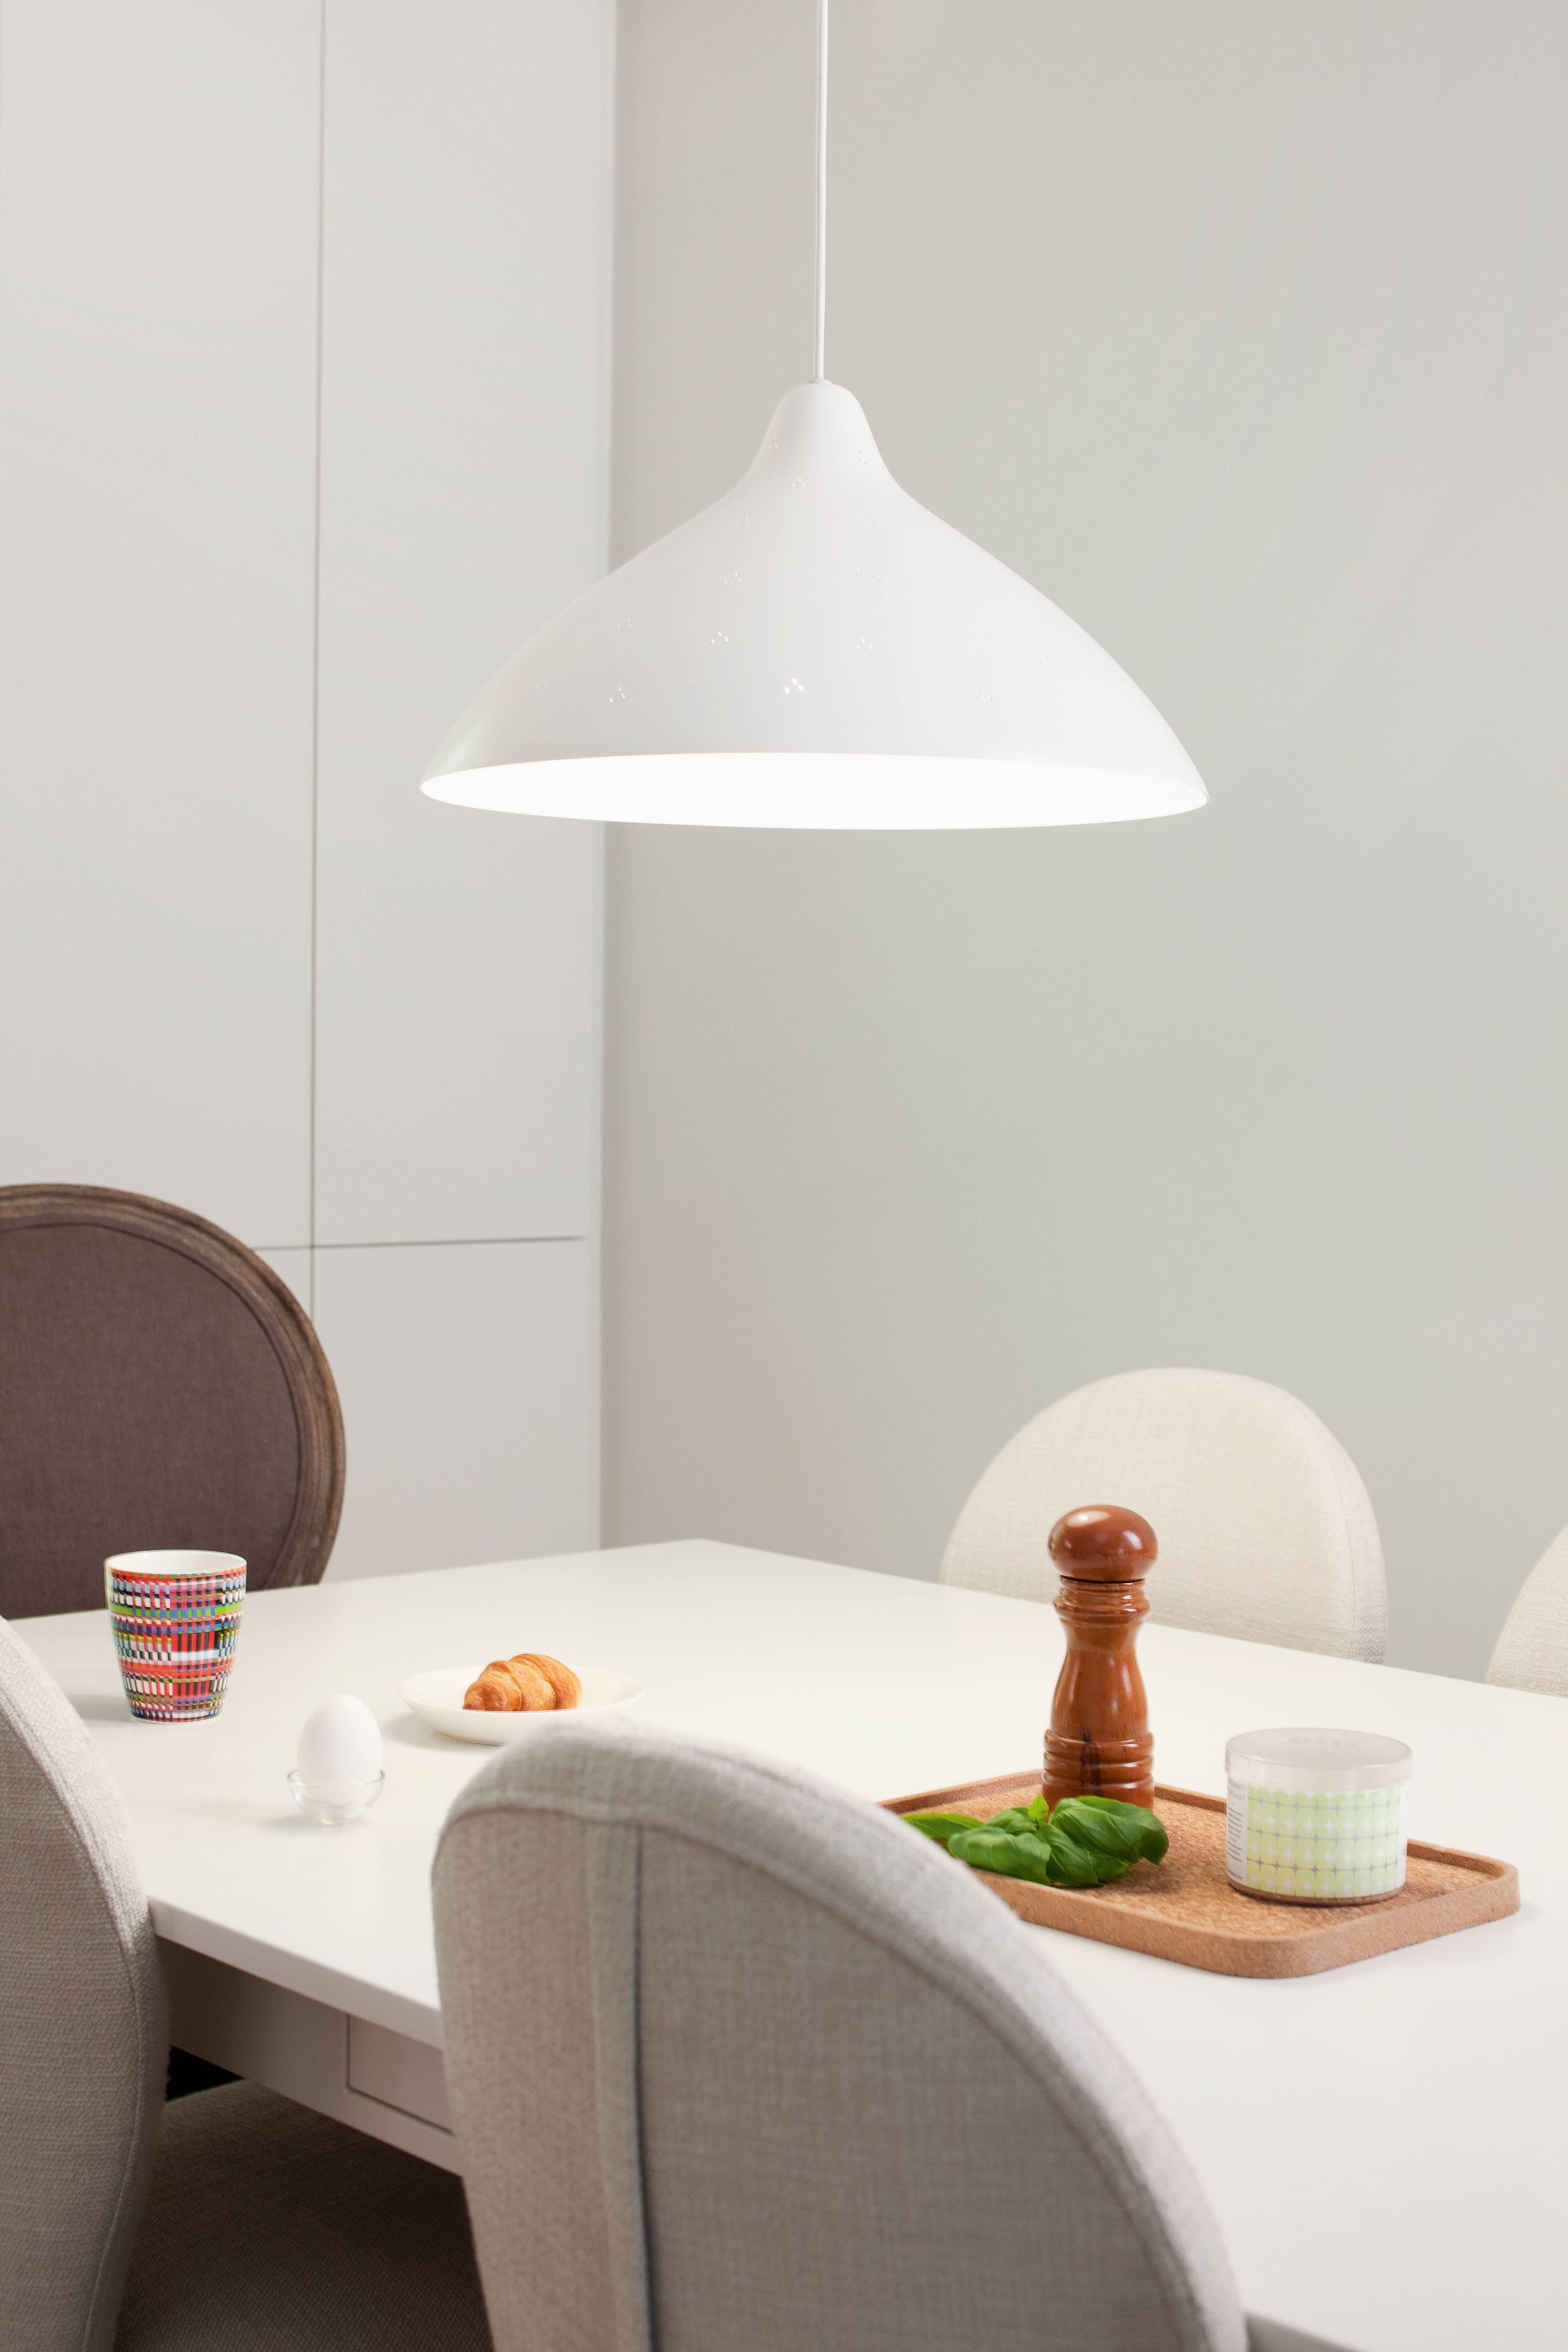 Lisa Johansson-Pape large white perforated metal pendant for Innolux Oy.

Originally designed in 1947, these authorized re-editions are true to the original charming simplicity of Pape's iconic design. The white interior of each metallic shade